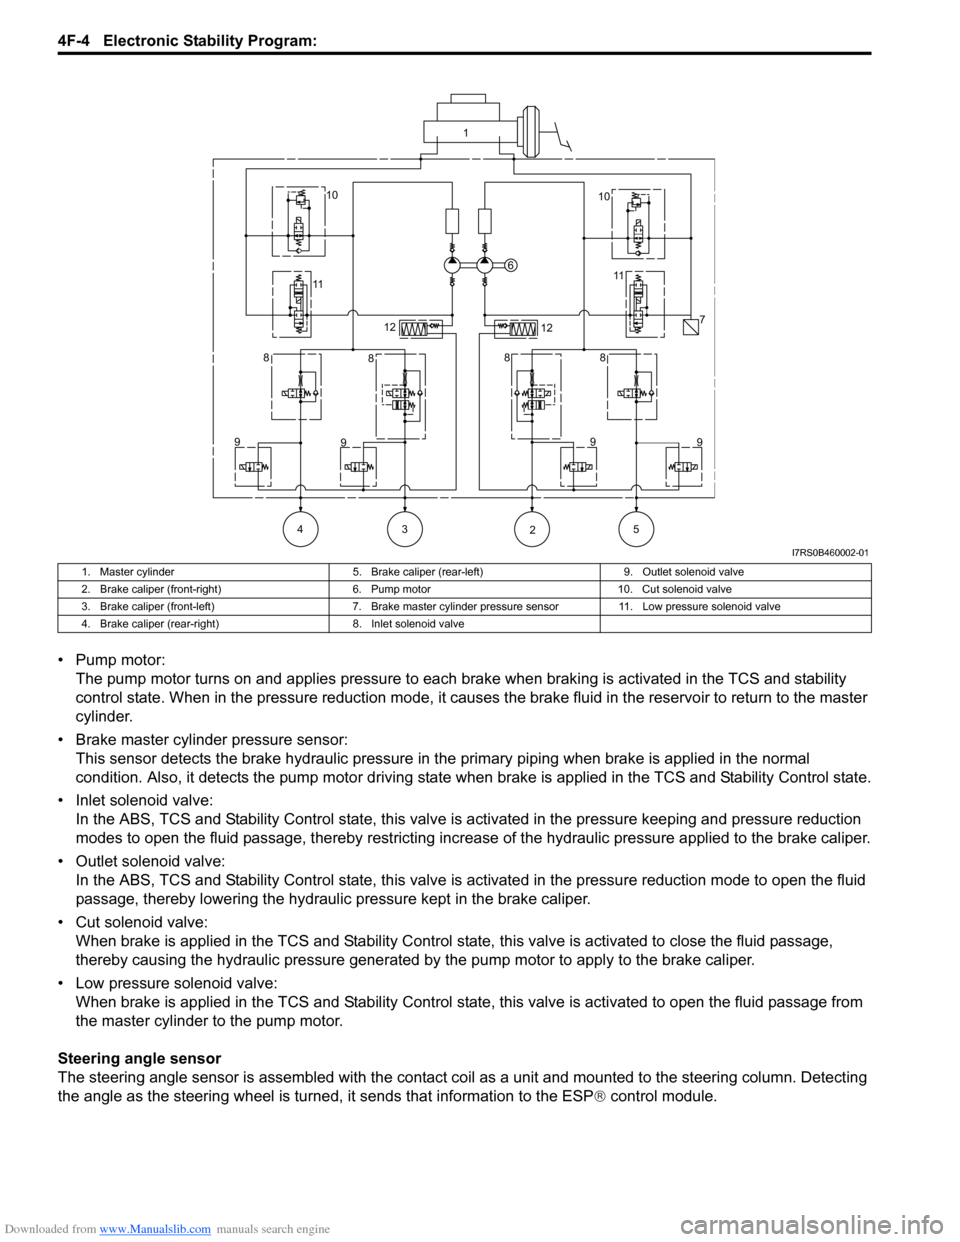 SUZUKI SWIFT 2006 2.G Service Service Manual Downloaded from www.Manualslib.com manuals search engine 4F-4 Electronic Stability Program: 
• Pump motor:The pump motor turns on and applies pressure to each brake when braking is activated in the 